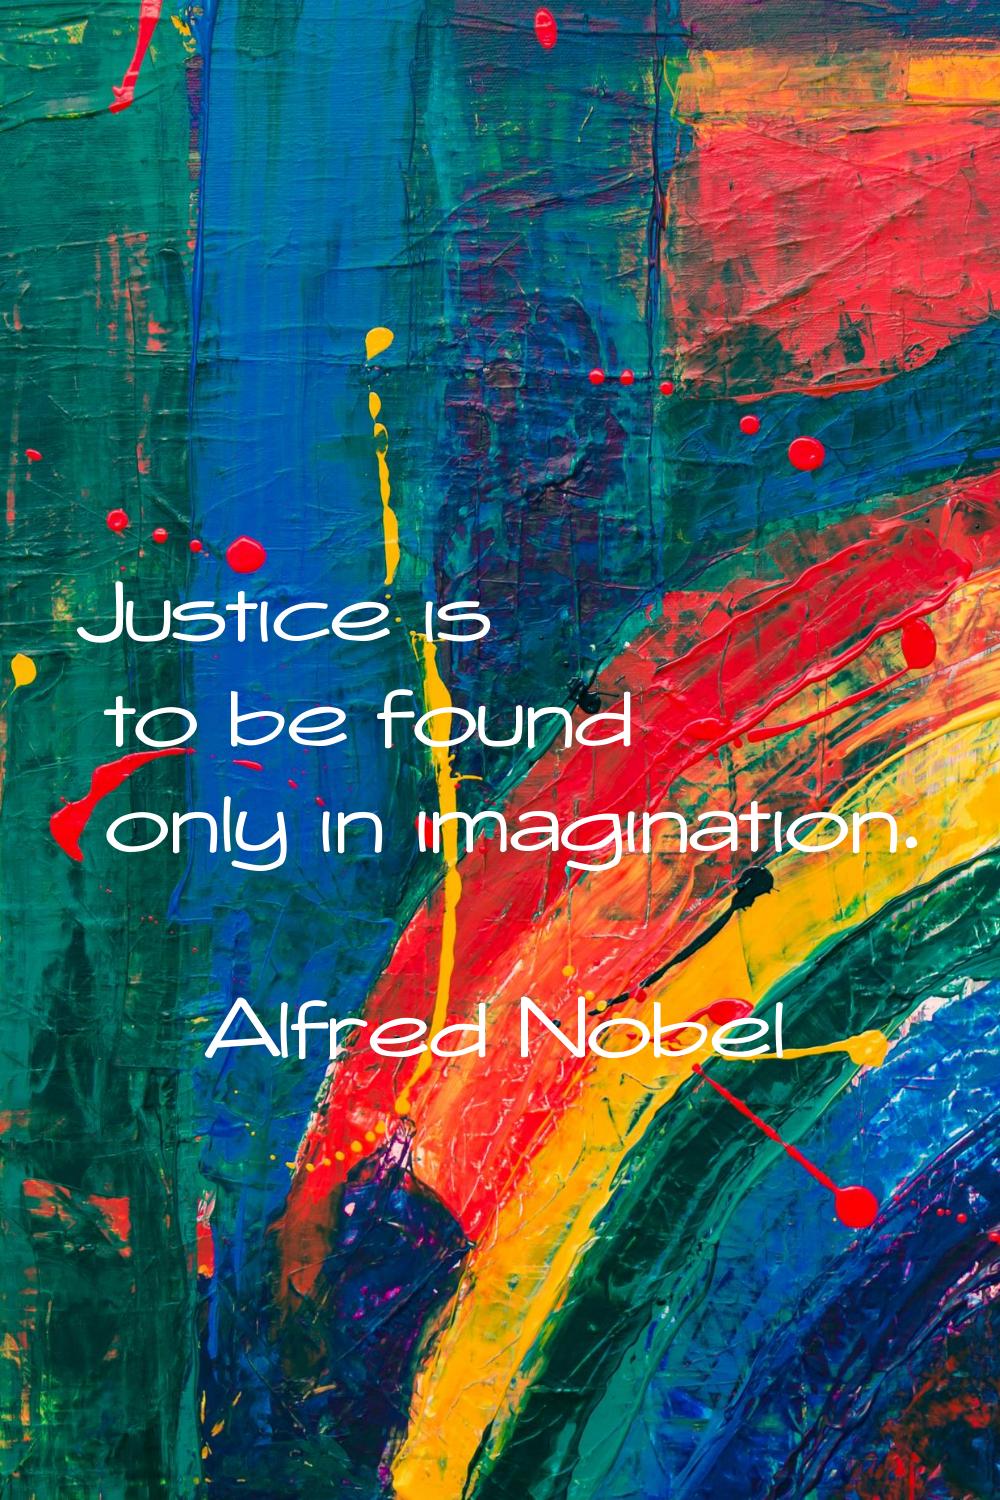 Justice is to be found only in imagination.